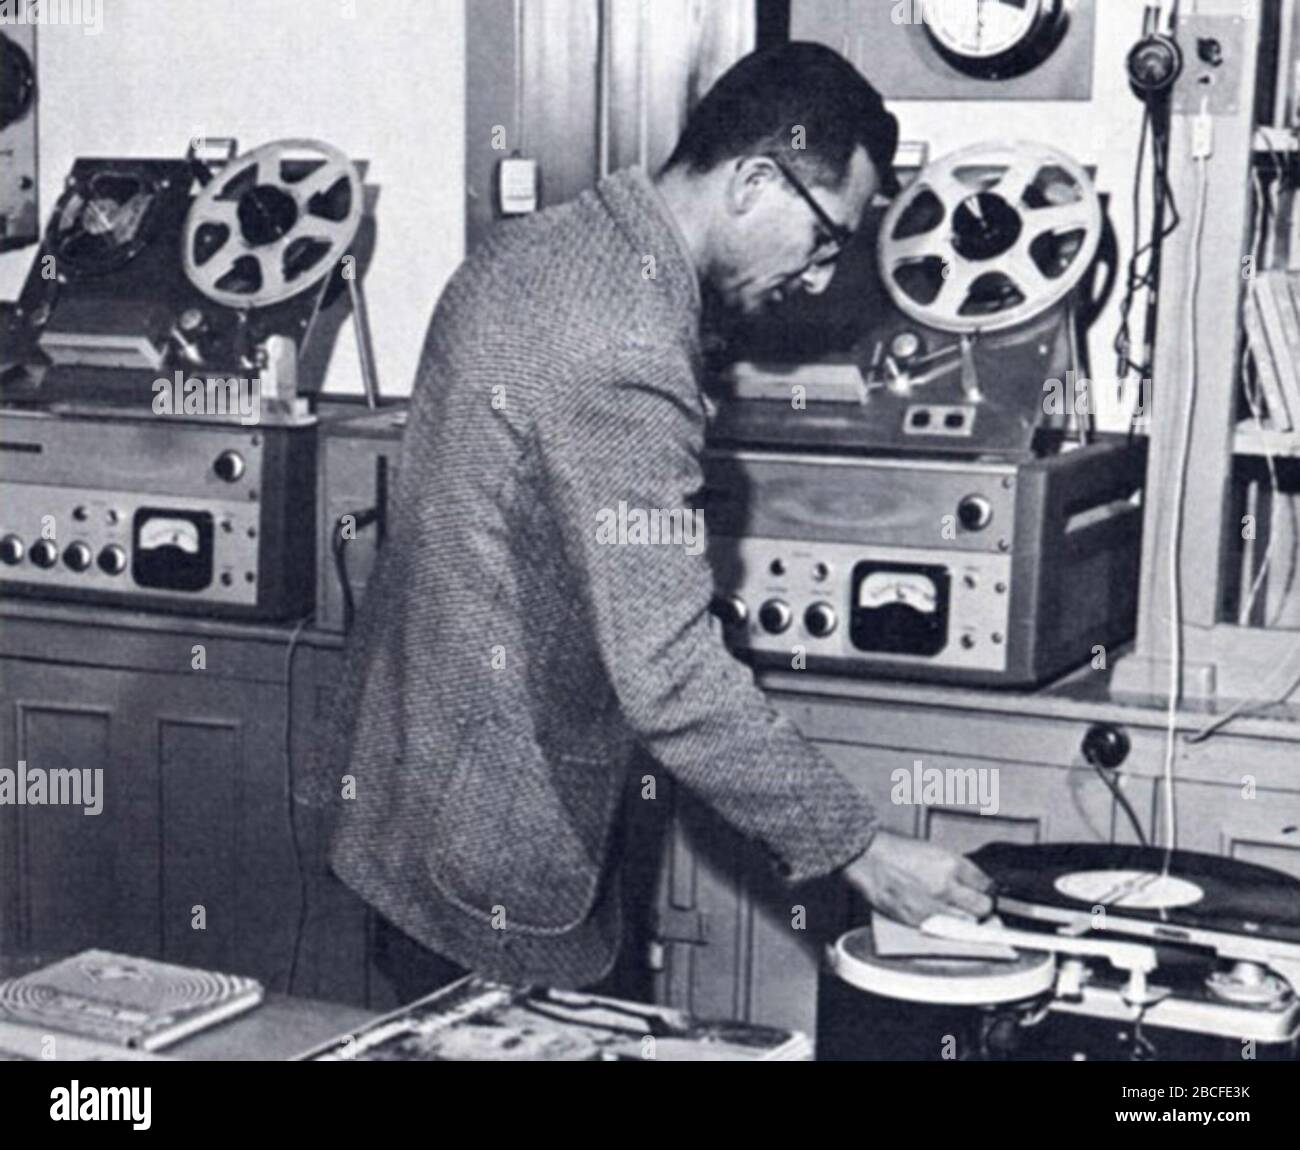 English: Afghan radio station. Original caption: Recording room pre-records  many interviews, special service programs for delayed broadcast.; 1950s  date QS:P,+1950-00-00T00:00:00Z/8 or early 1960s; according to Qayoumi,  most of the book's images dated